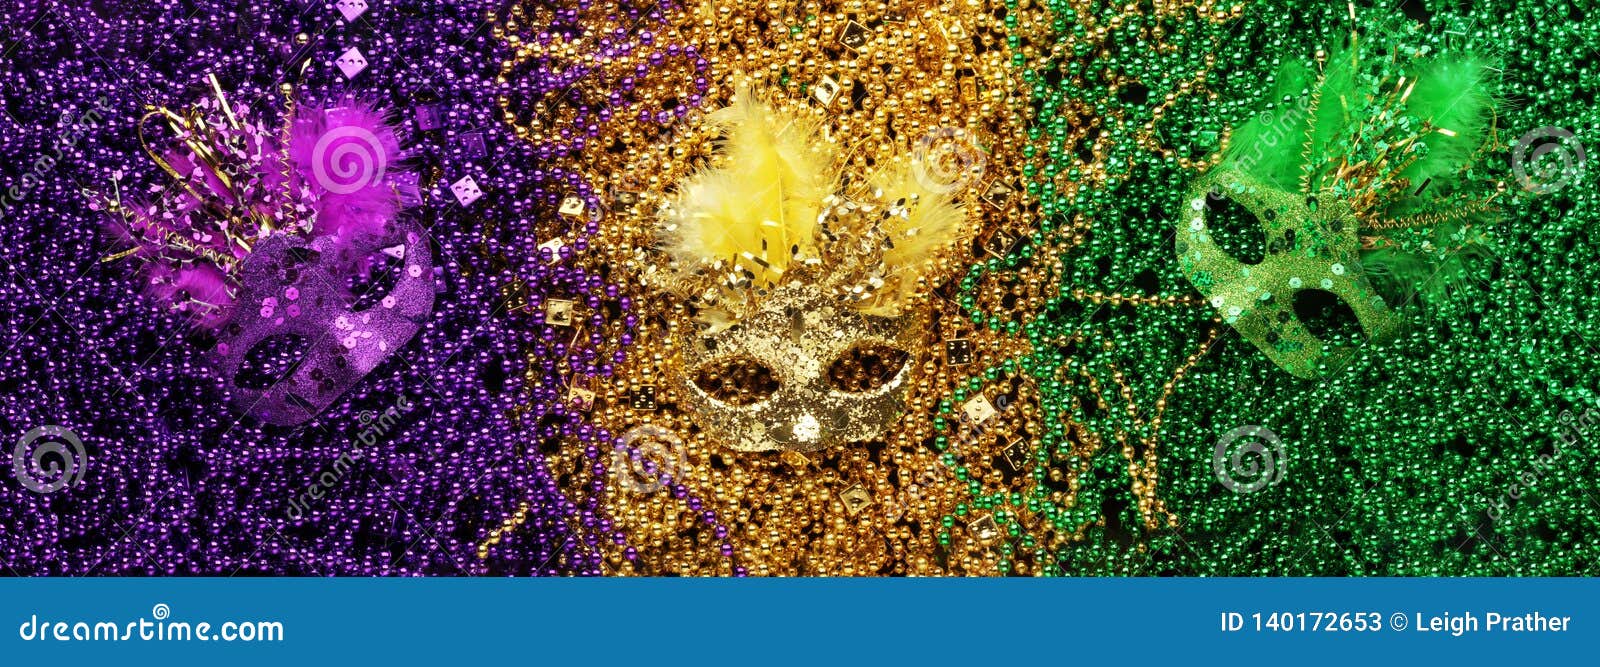 purple, gold, and green mardi gras beads and masks